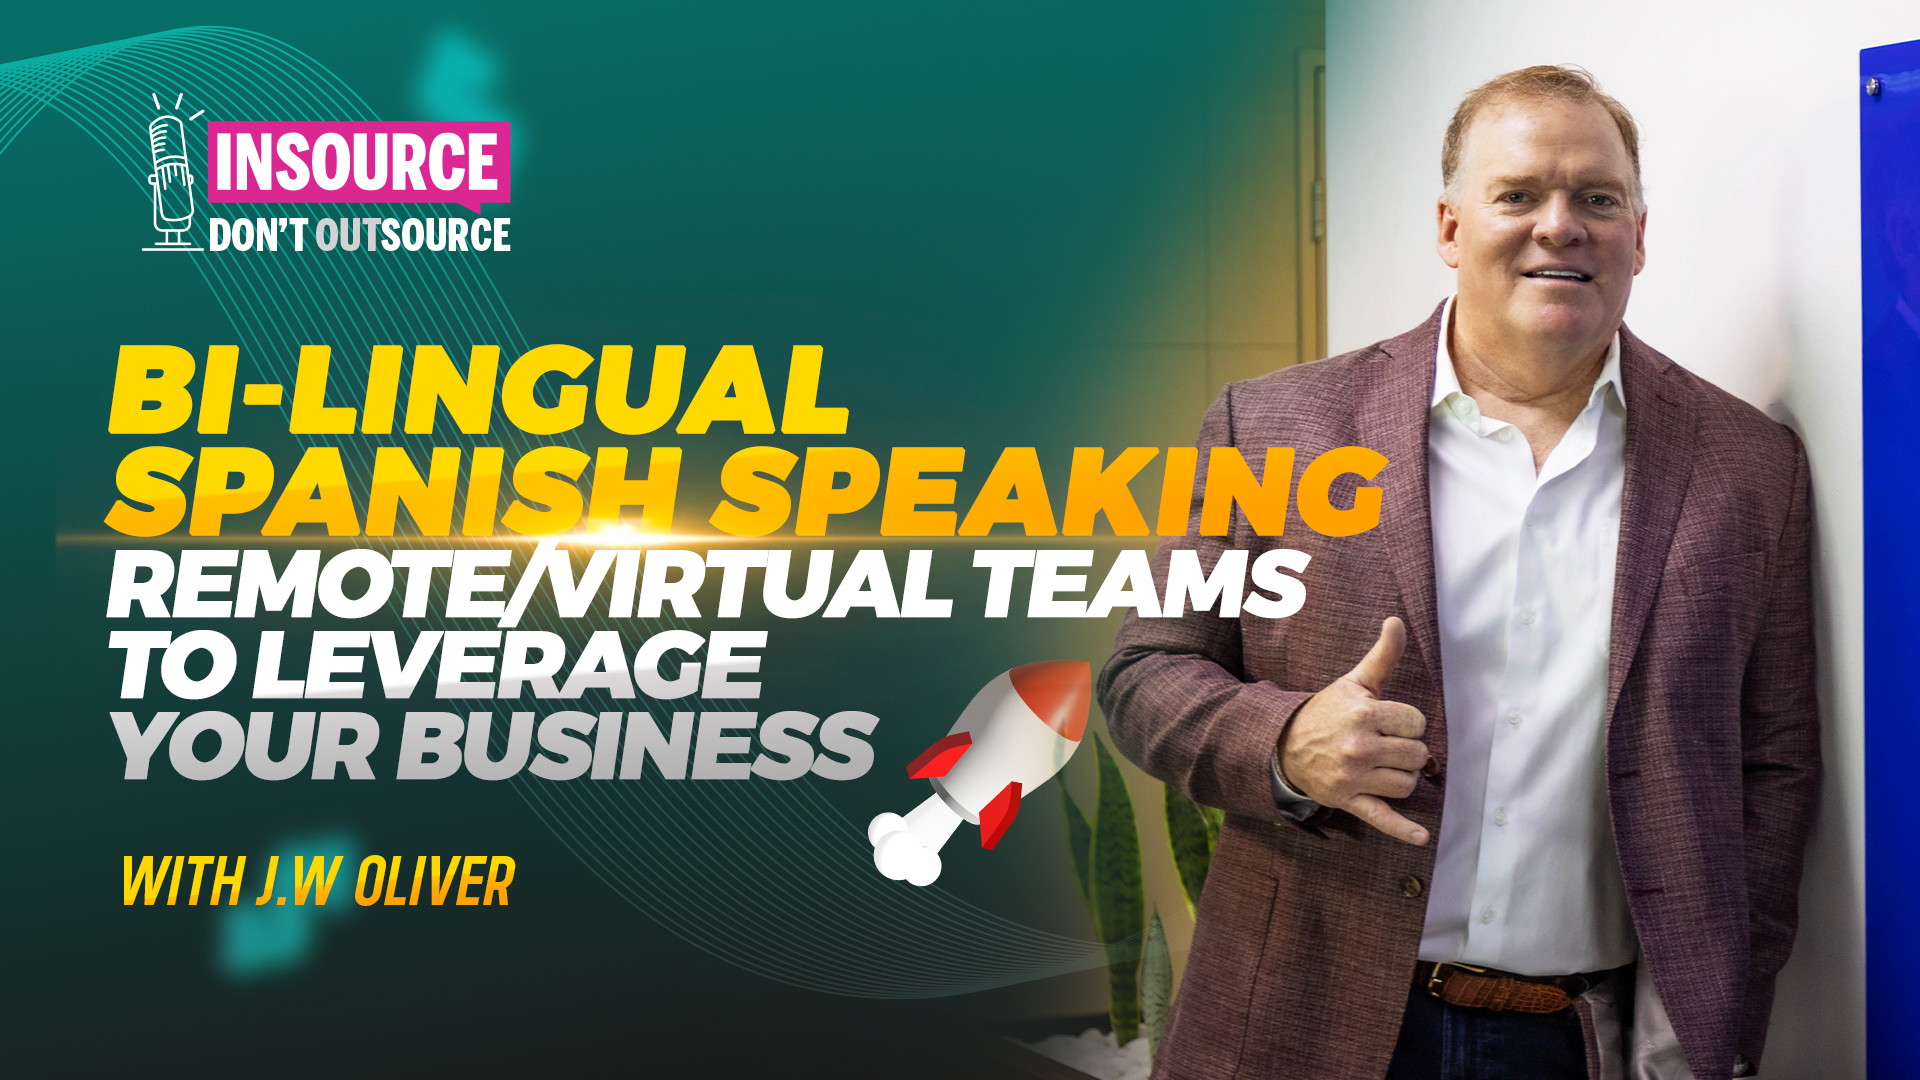 Episode 26 | Bi-Lingual Spanish Speaking Remote/Virtual Teams to Leverage Your Business